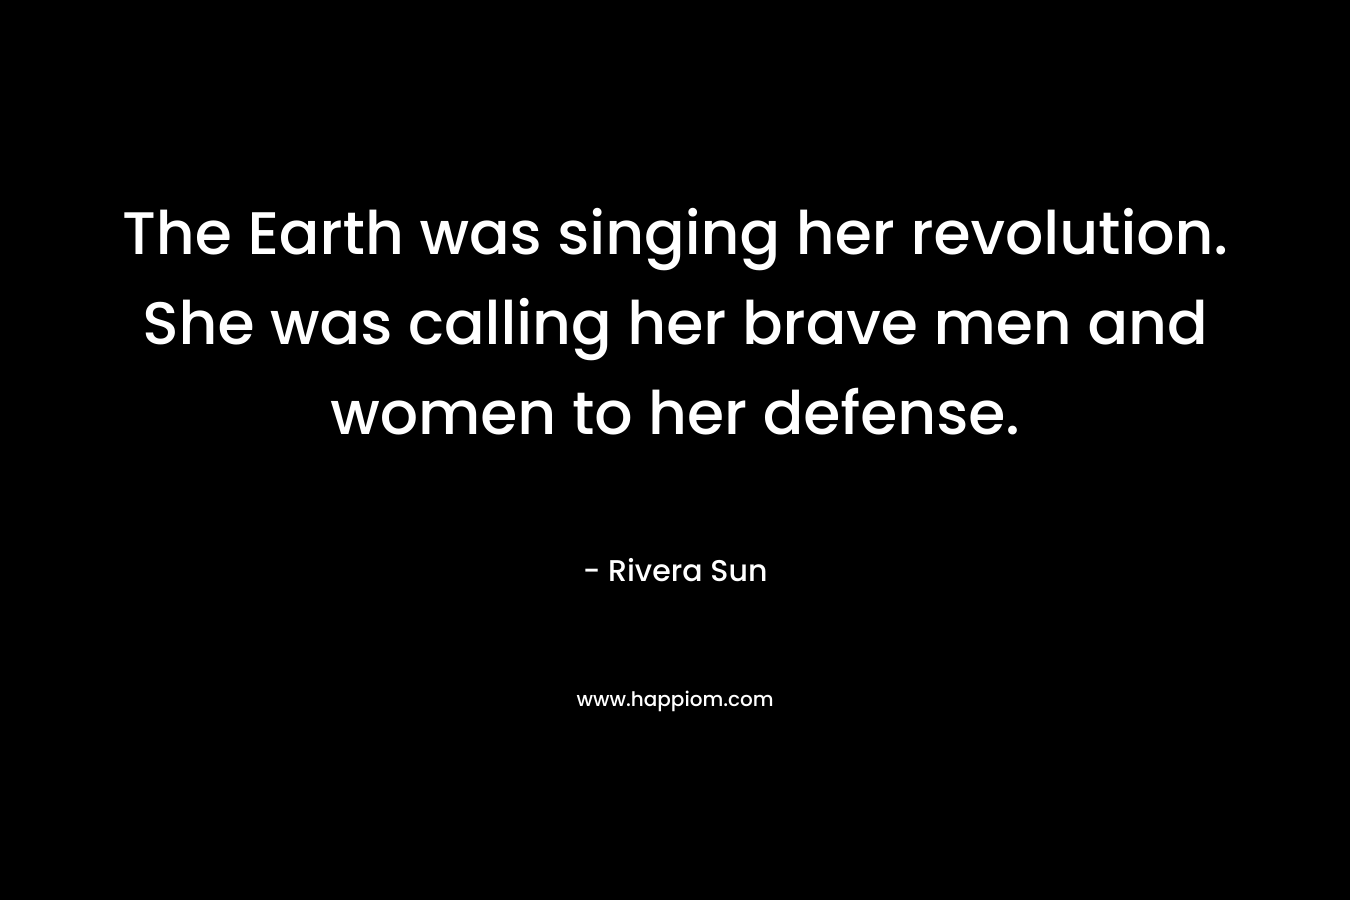 The Earth was singing her revolution. She was calling her brave men and women to her defense. – Rivera Sun